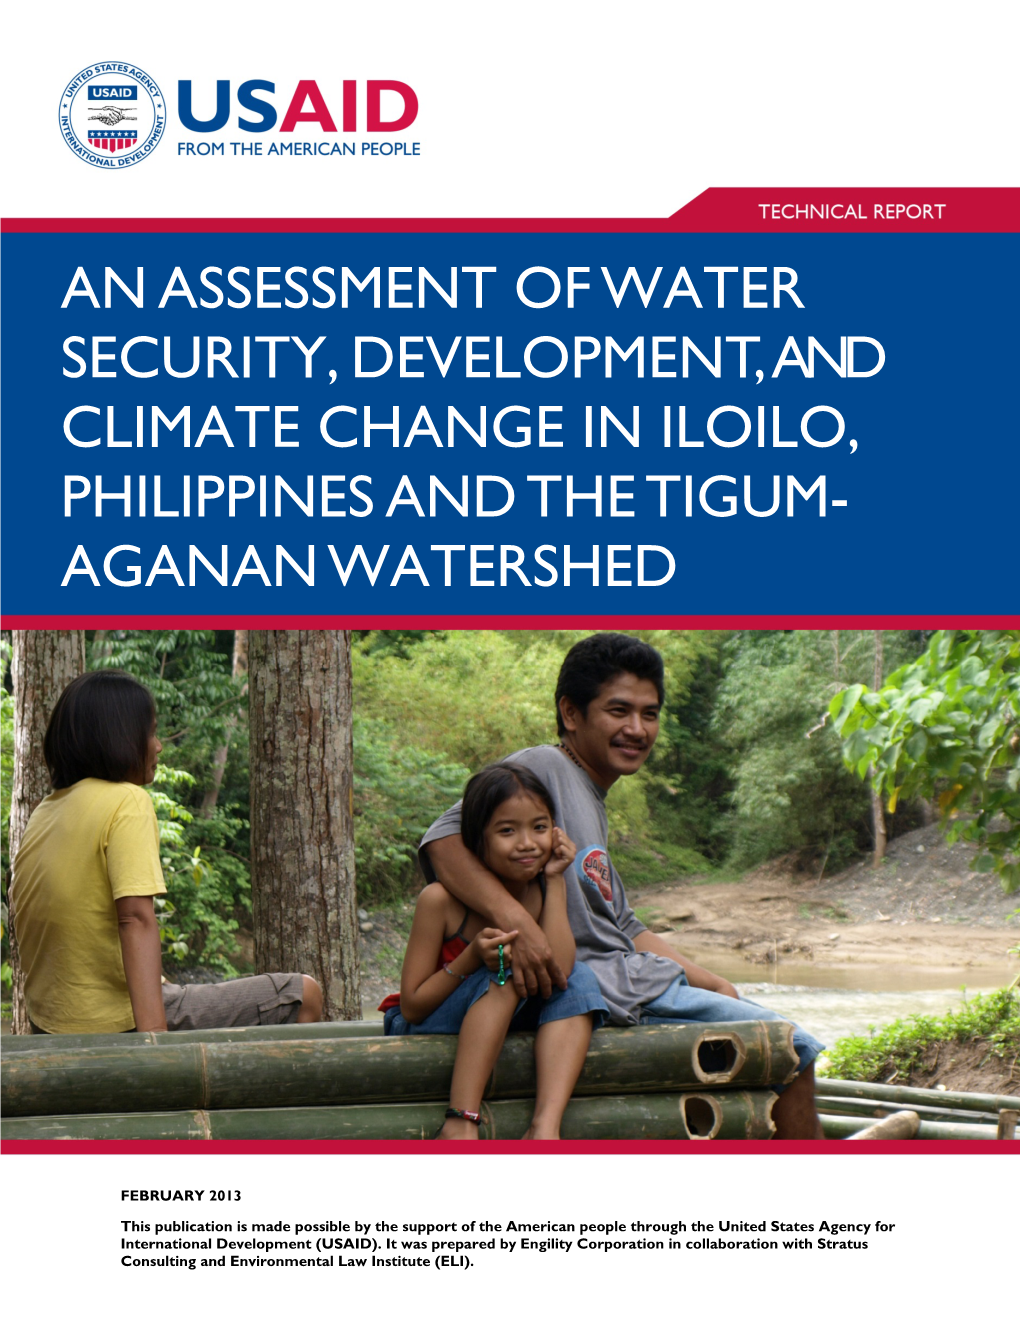 An Assessment of Water Security, Development, and Climate Change in Iloilo, Philippines and the Tigum- Aganan Watershed